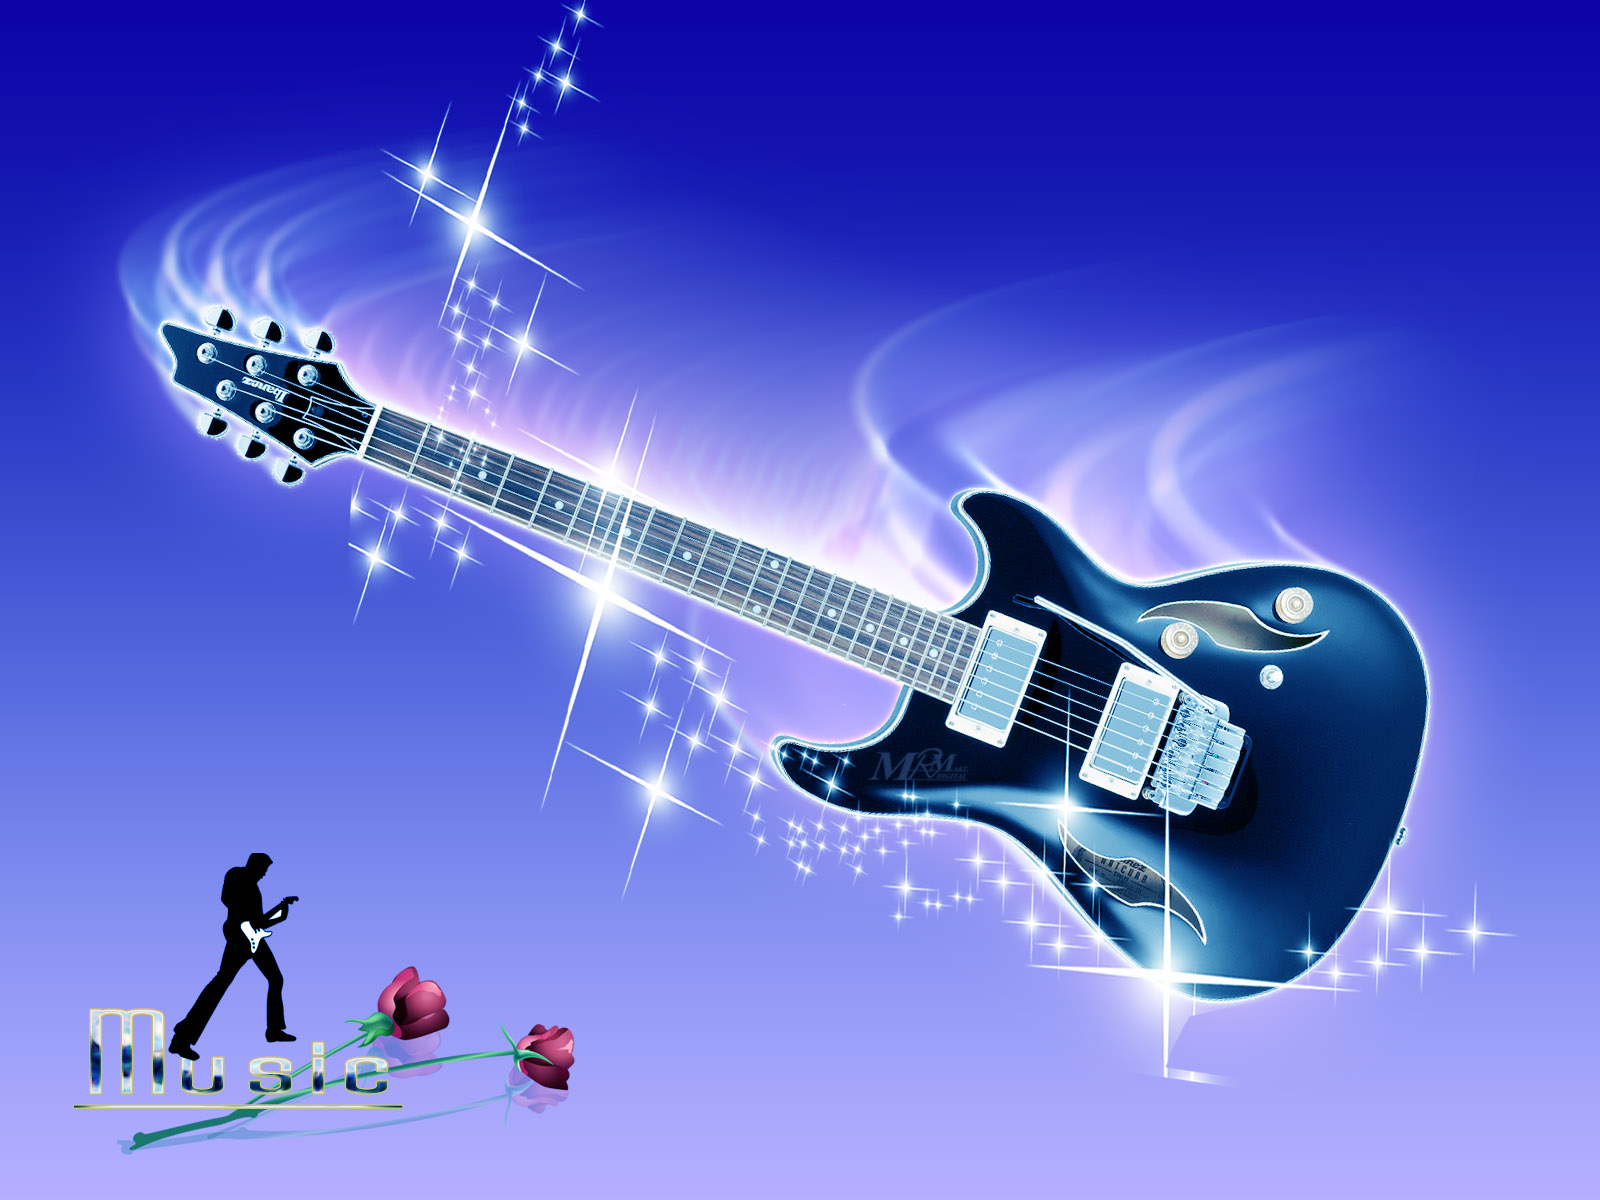 Music Background Images 1400 Free Banner Background Photos Download   Lovepik